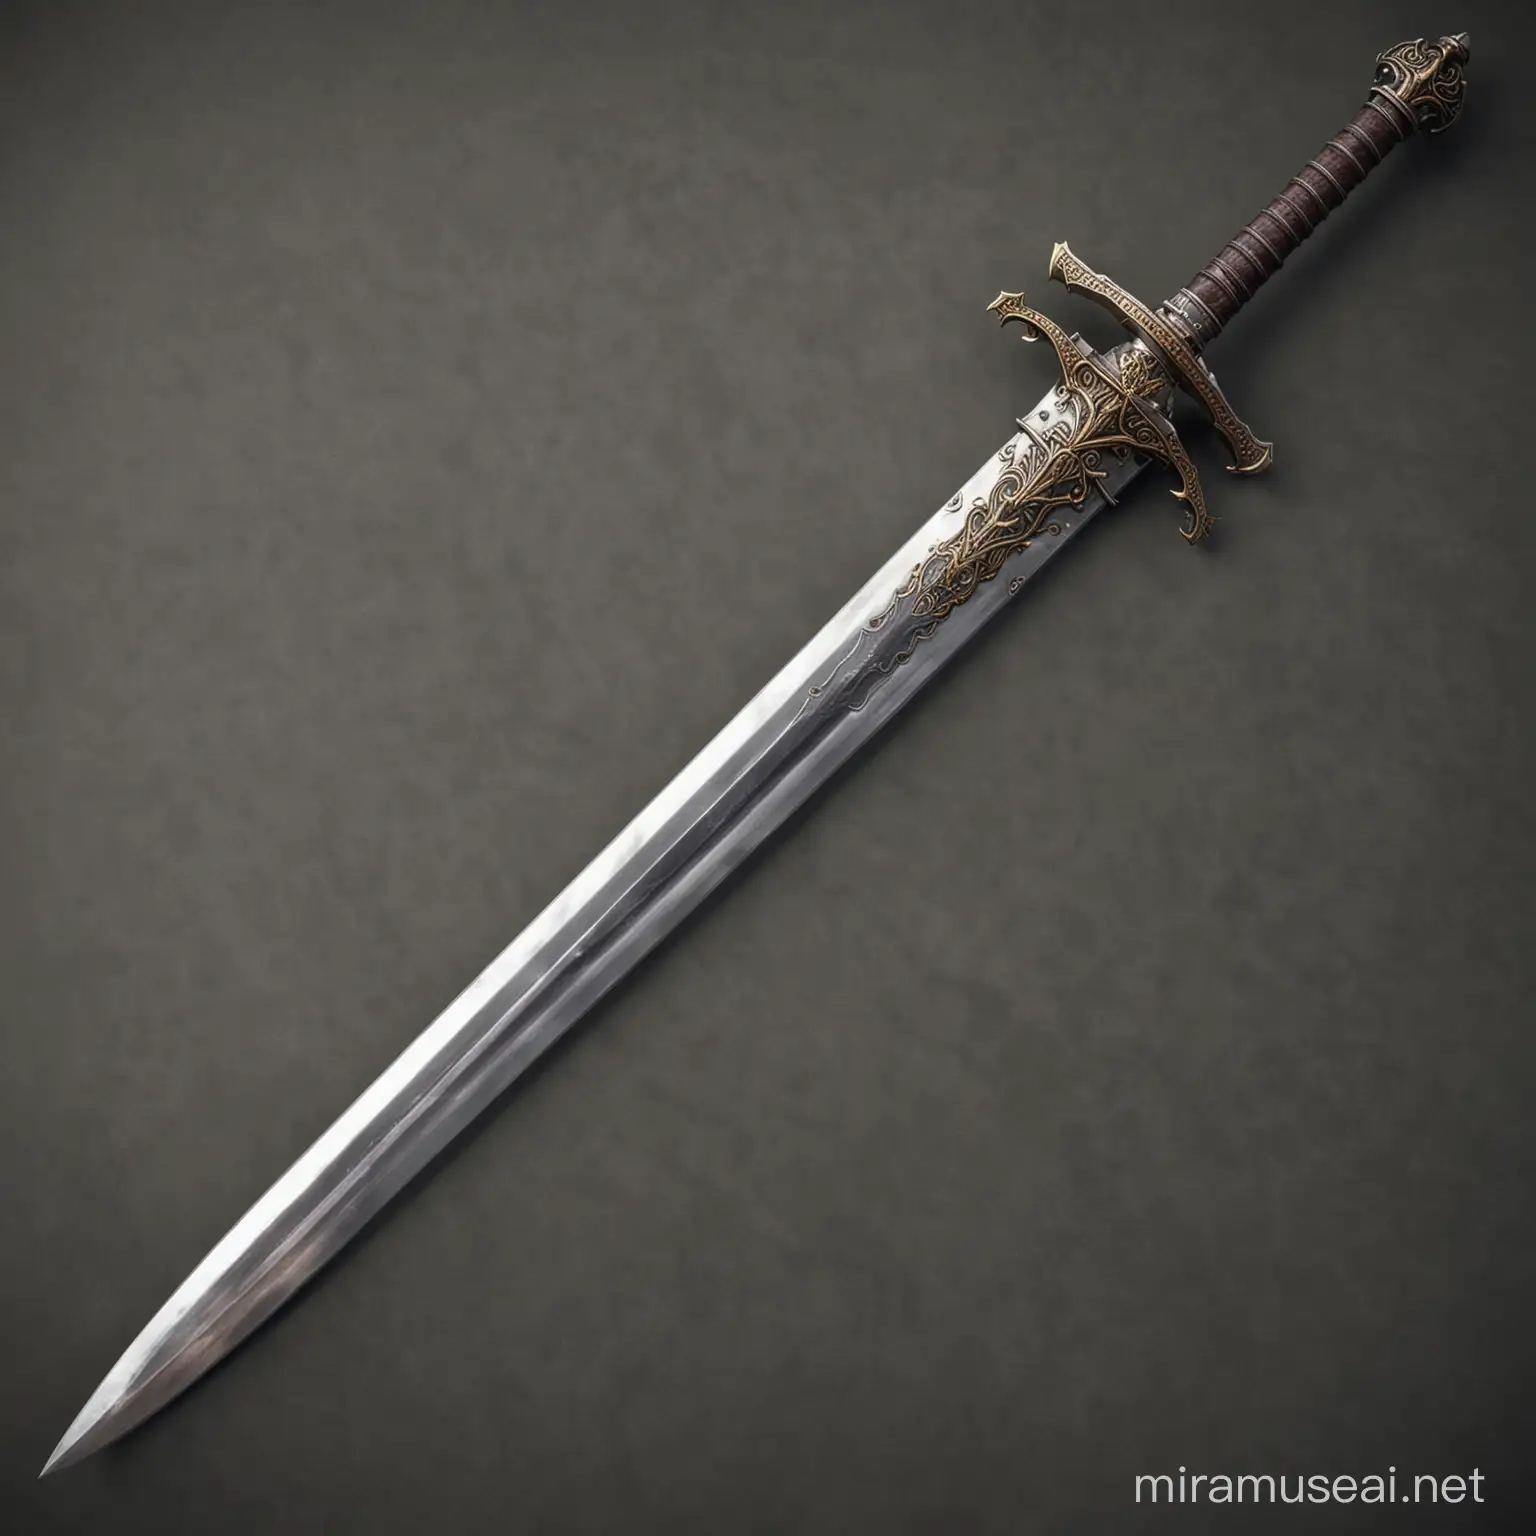 Authentic Medieval Sword Detailed Replica Weapon for Historical Reenactments